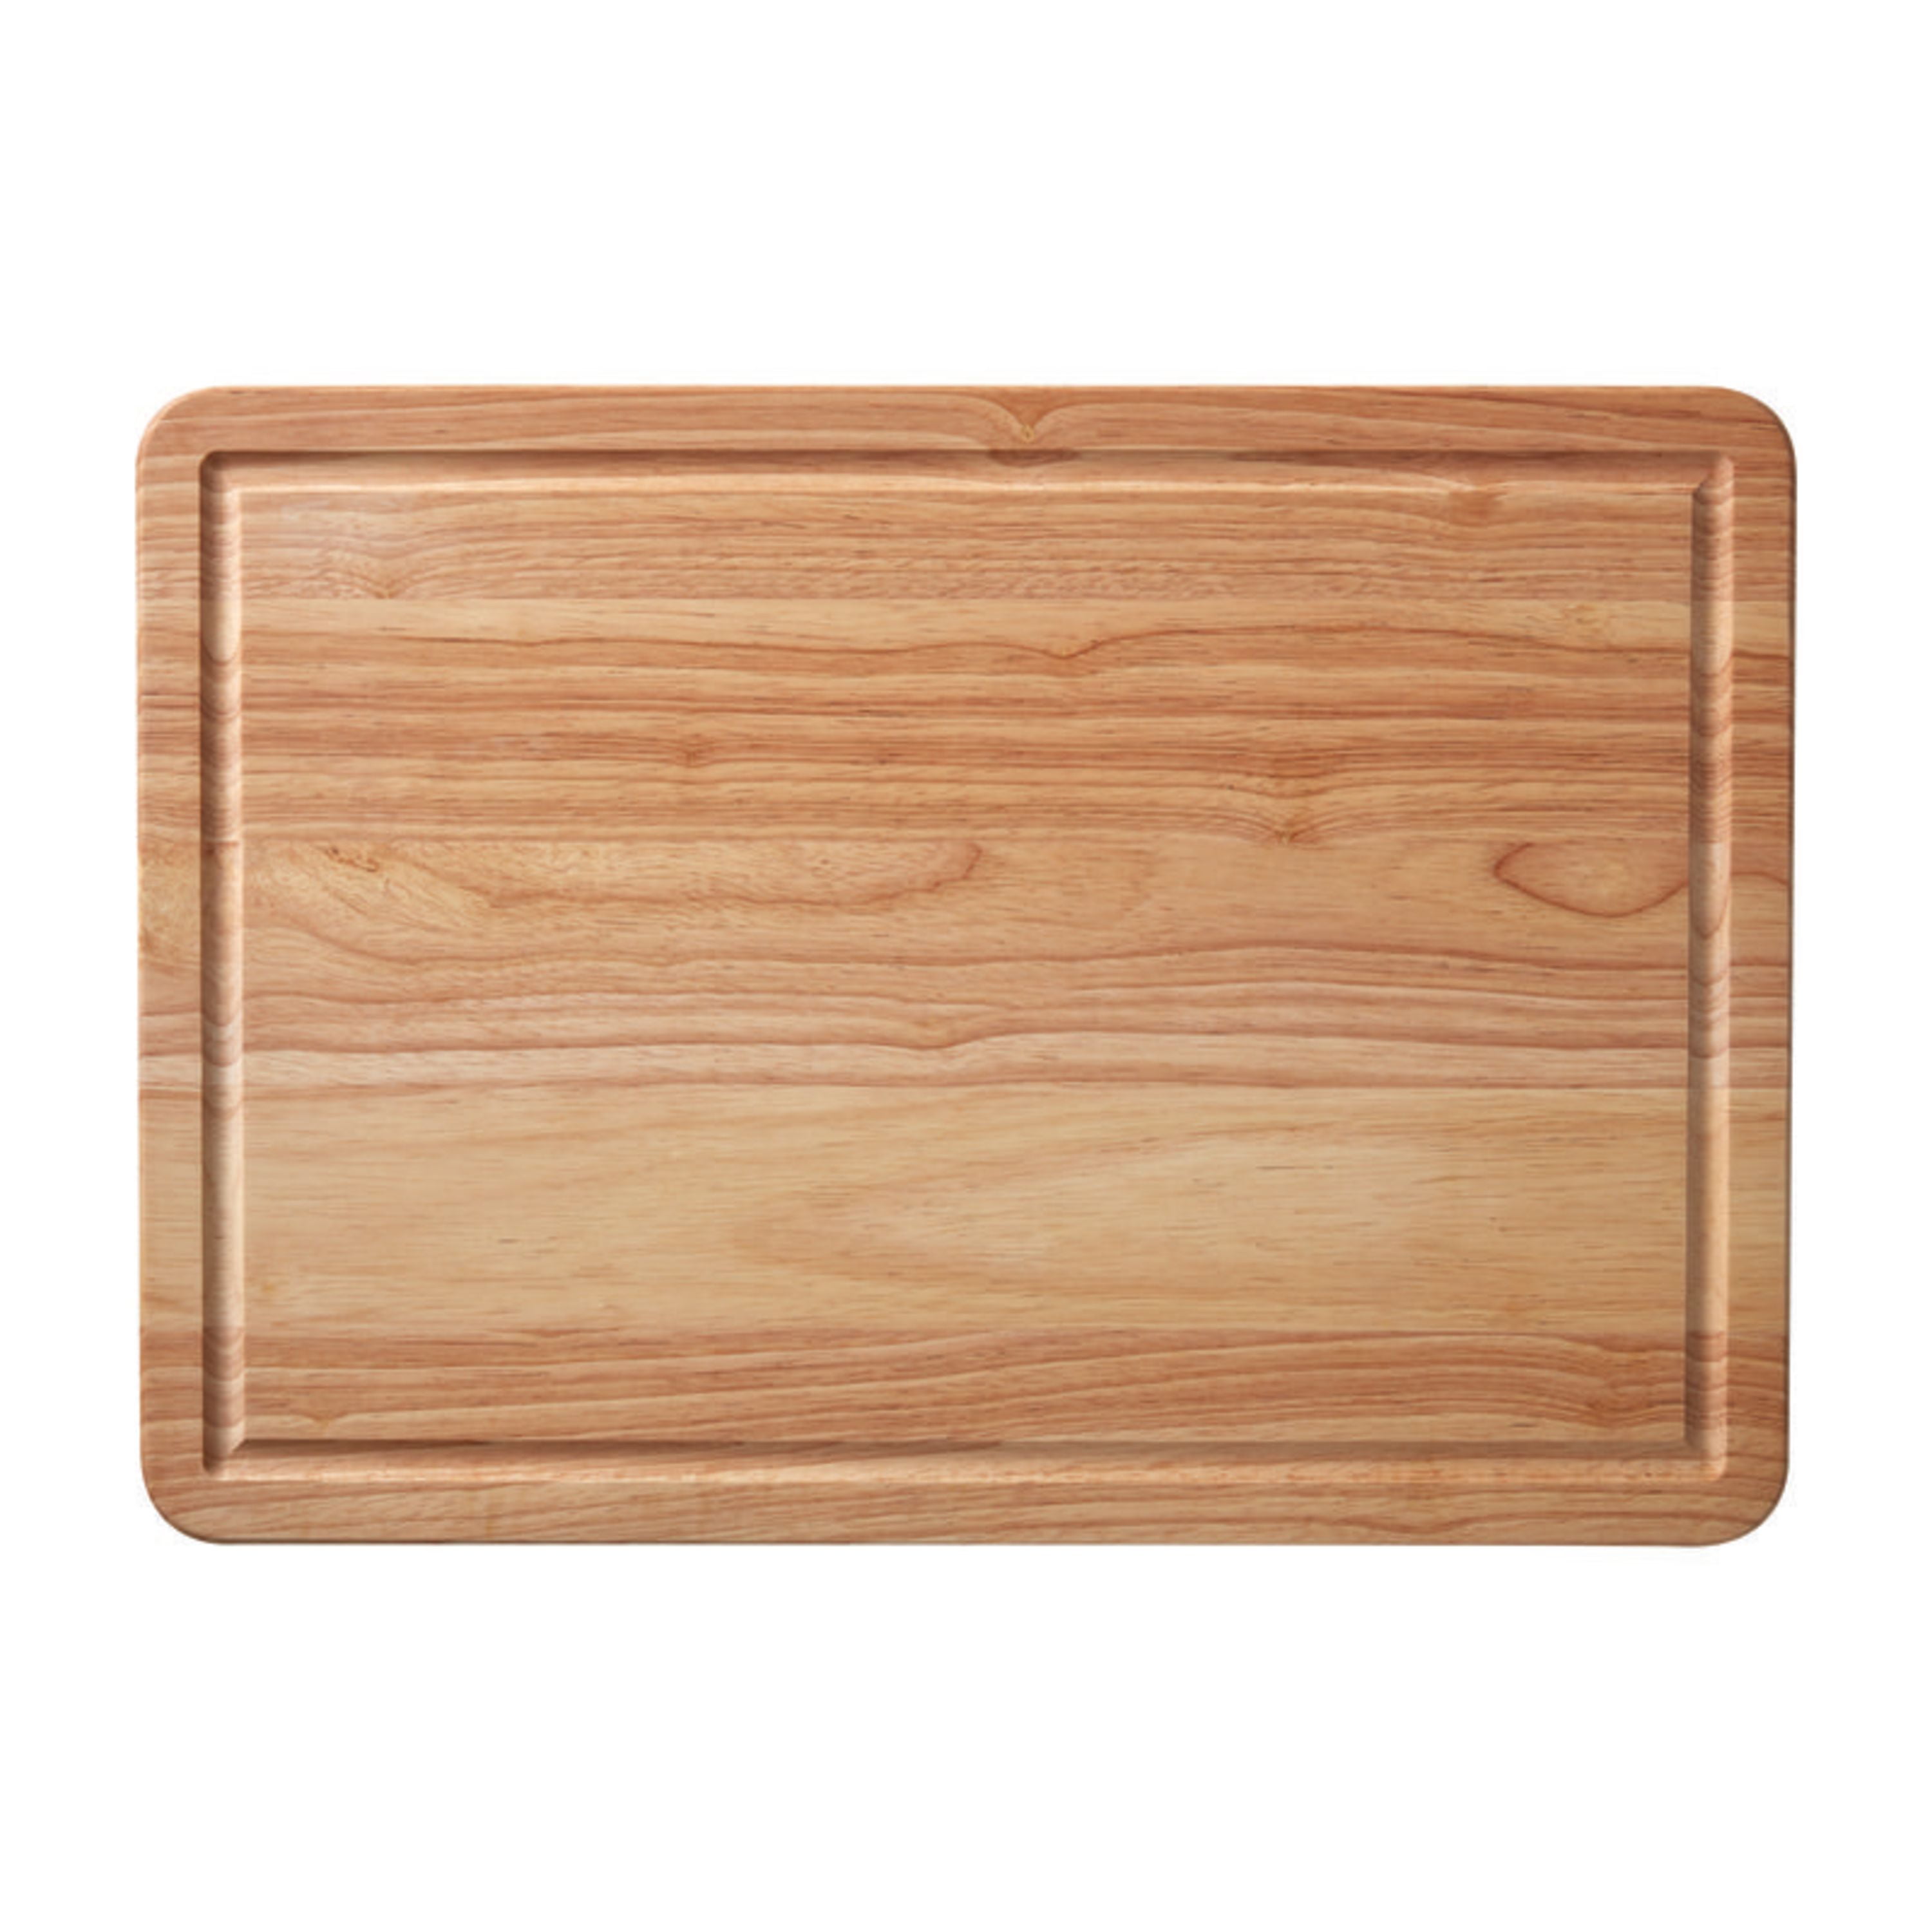 Wood and cork apple cutting boards